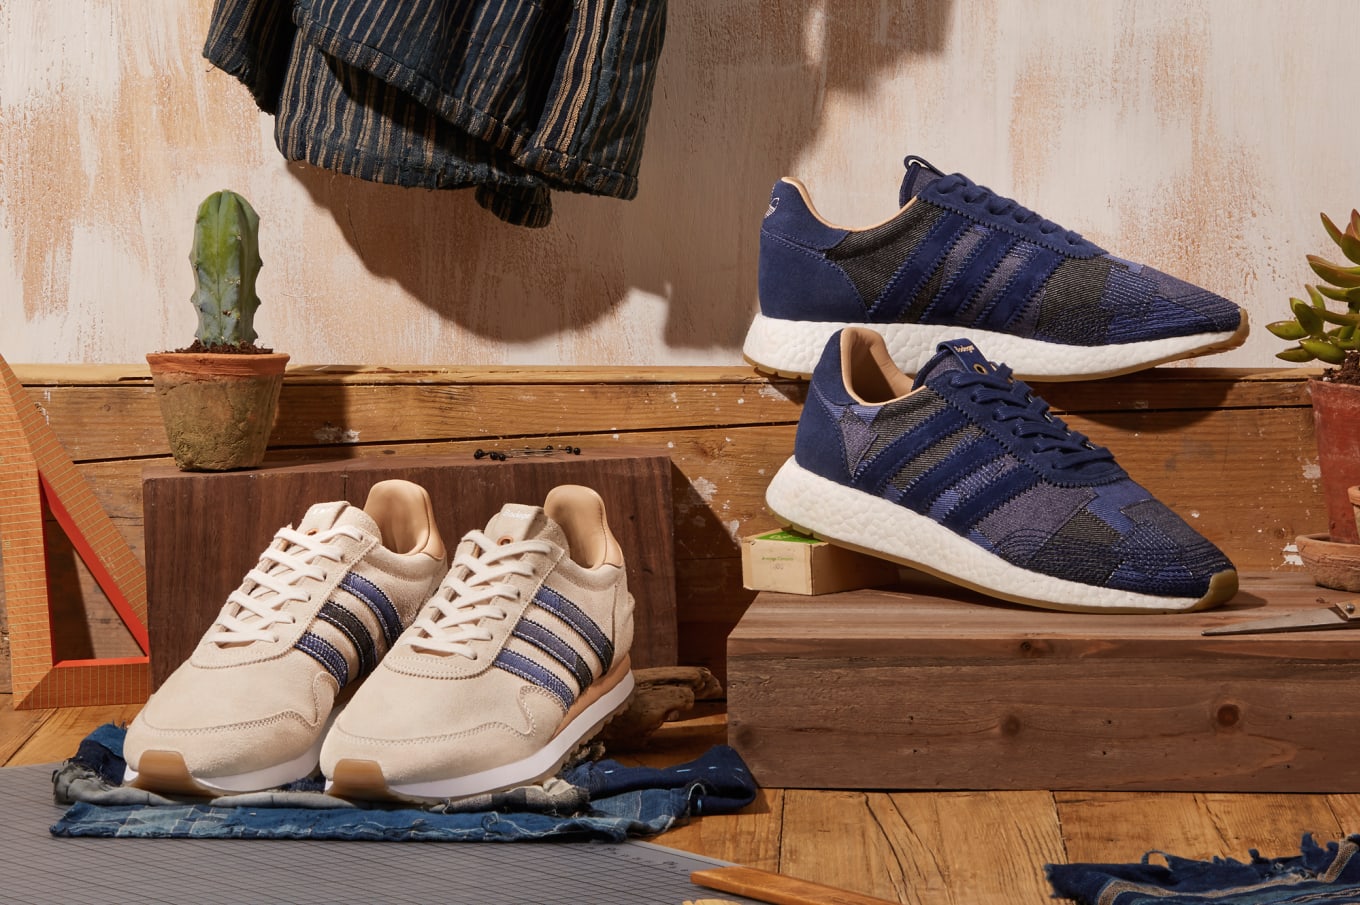 adidas haven release